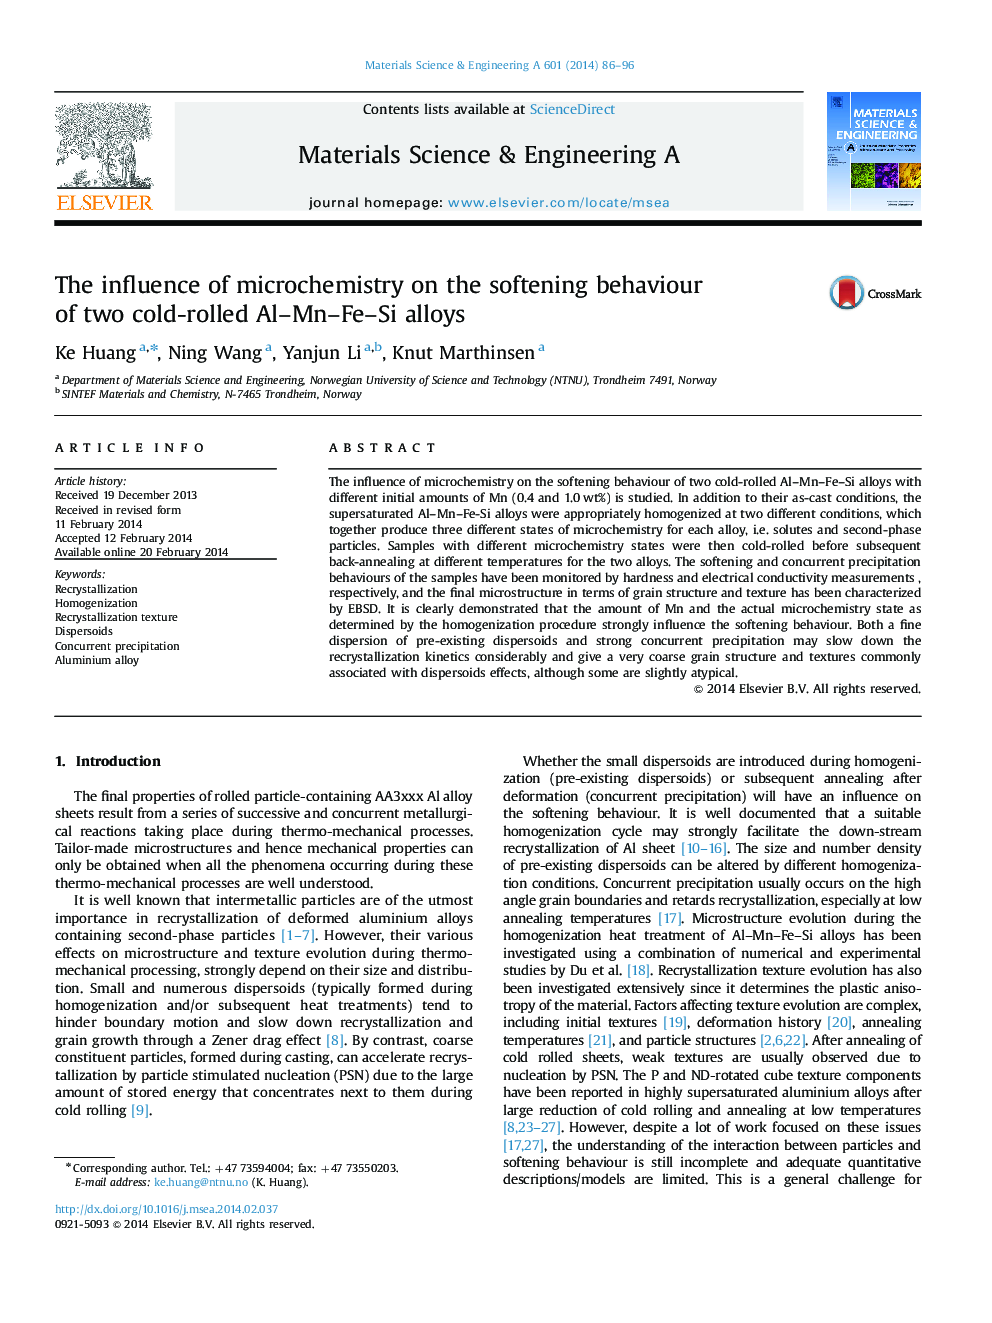 The influence of microchemistry on the softening behaviour of two cold-rolled Al-Mn-Fe-Si alloys